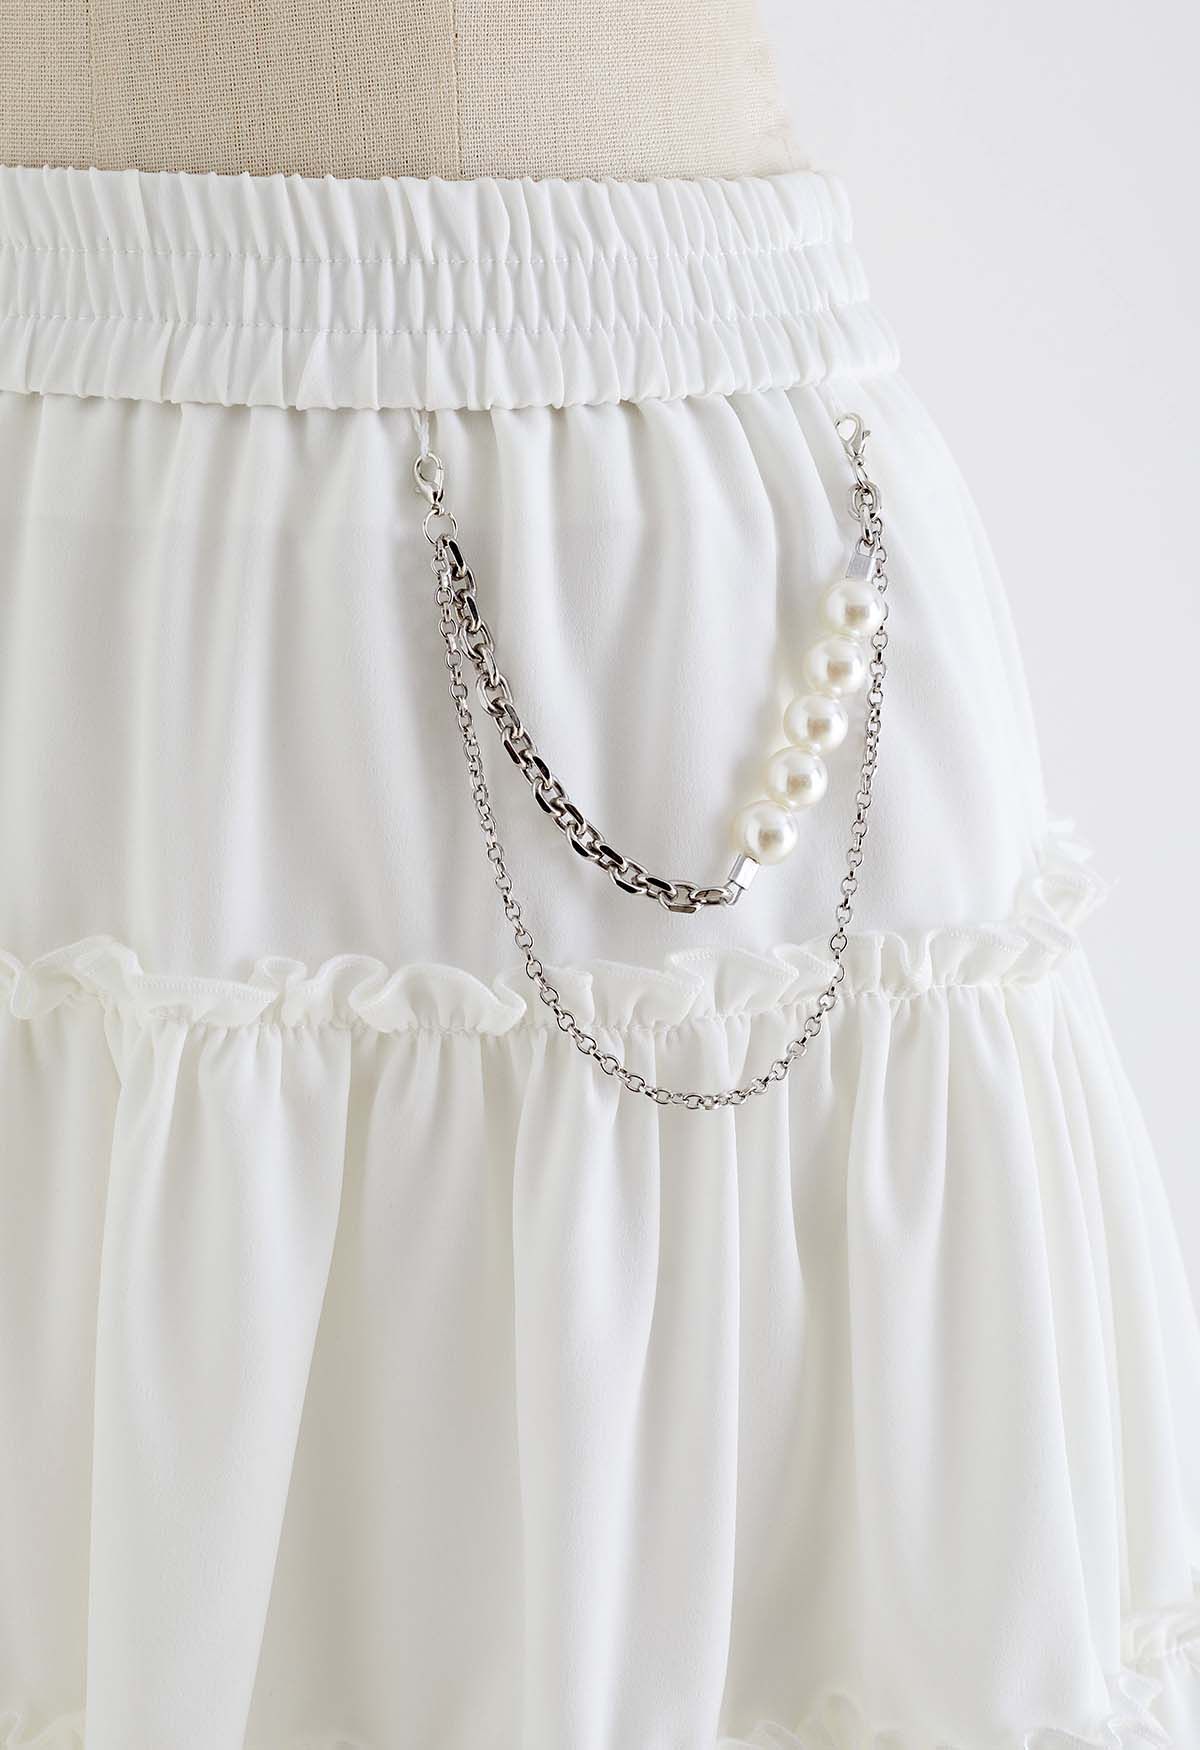 Pearl Embellished Midi Skirt in White - Retro, Indie and Unique Fashion